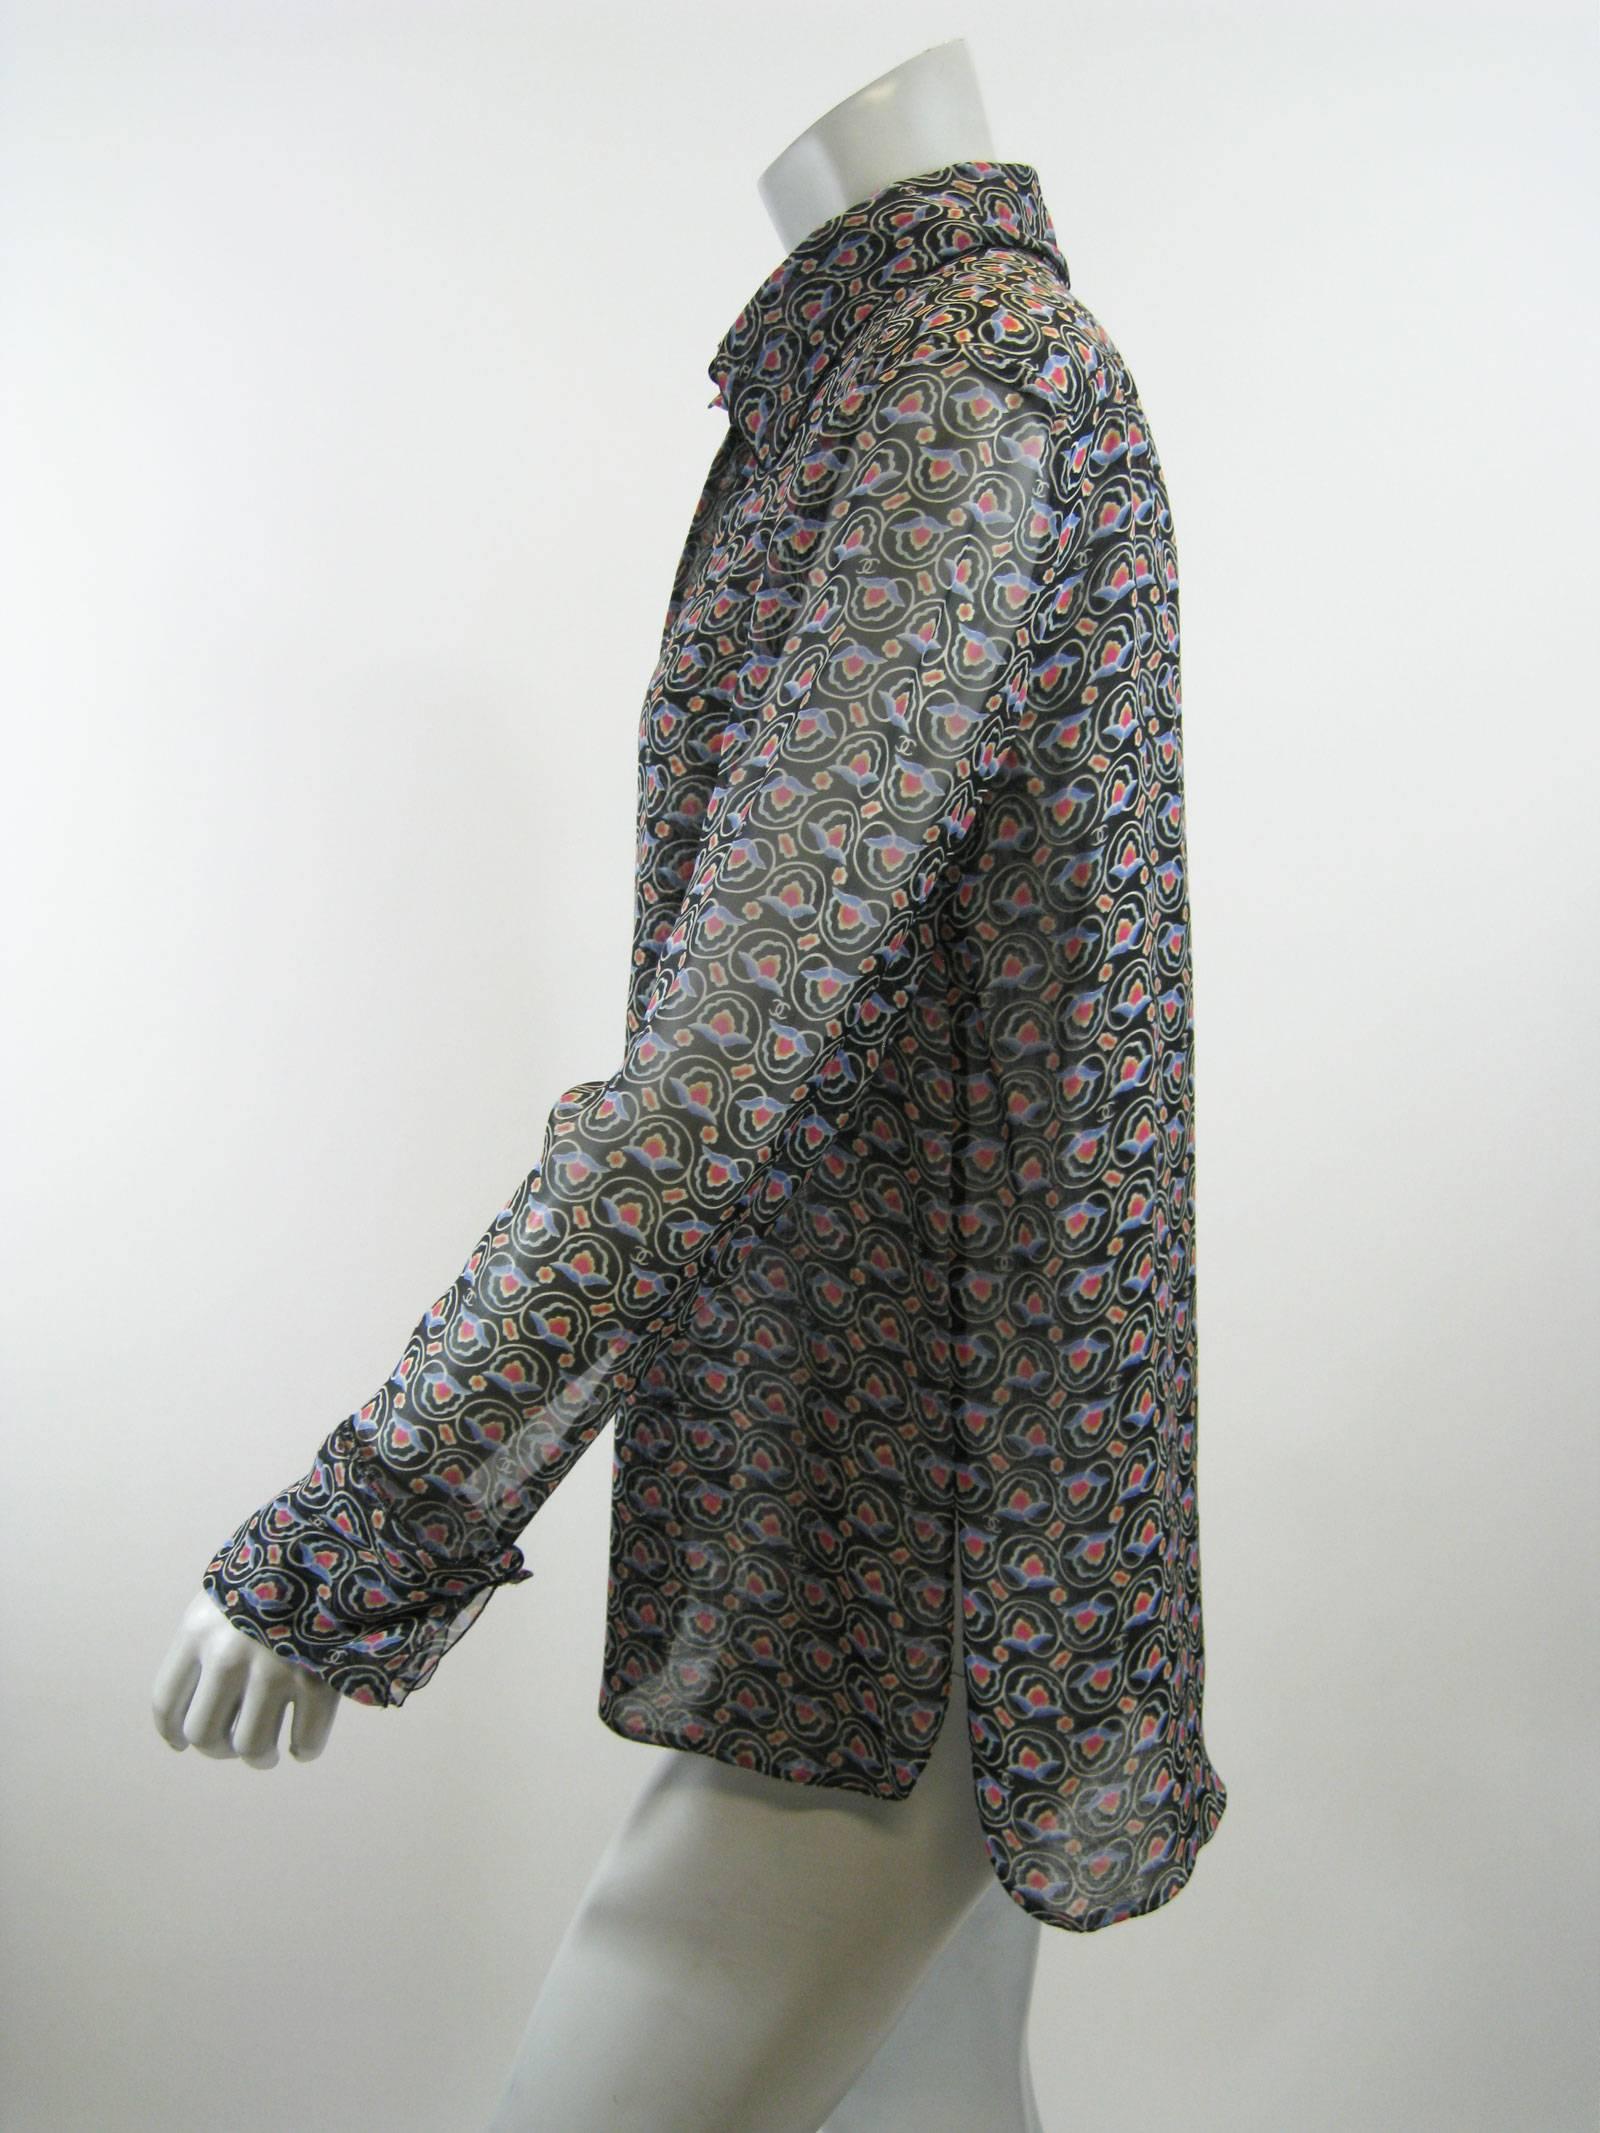 Light and sheer Chanel blouse.
Black white white, pink, gold and blue floral motof with Cc logo,
Hidden button placket.
Small black plastic Chanel imprinted buttons. 
Fold over cuffs with buttons.
Fold over collar, 
There are two button holes